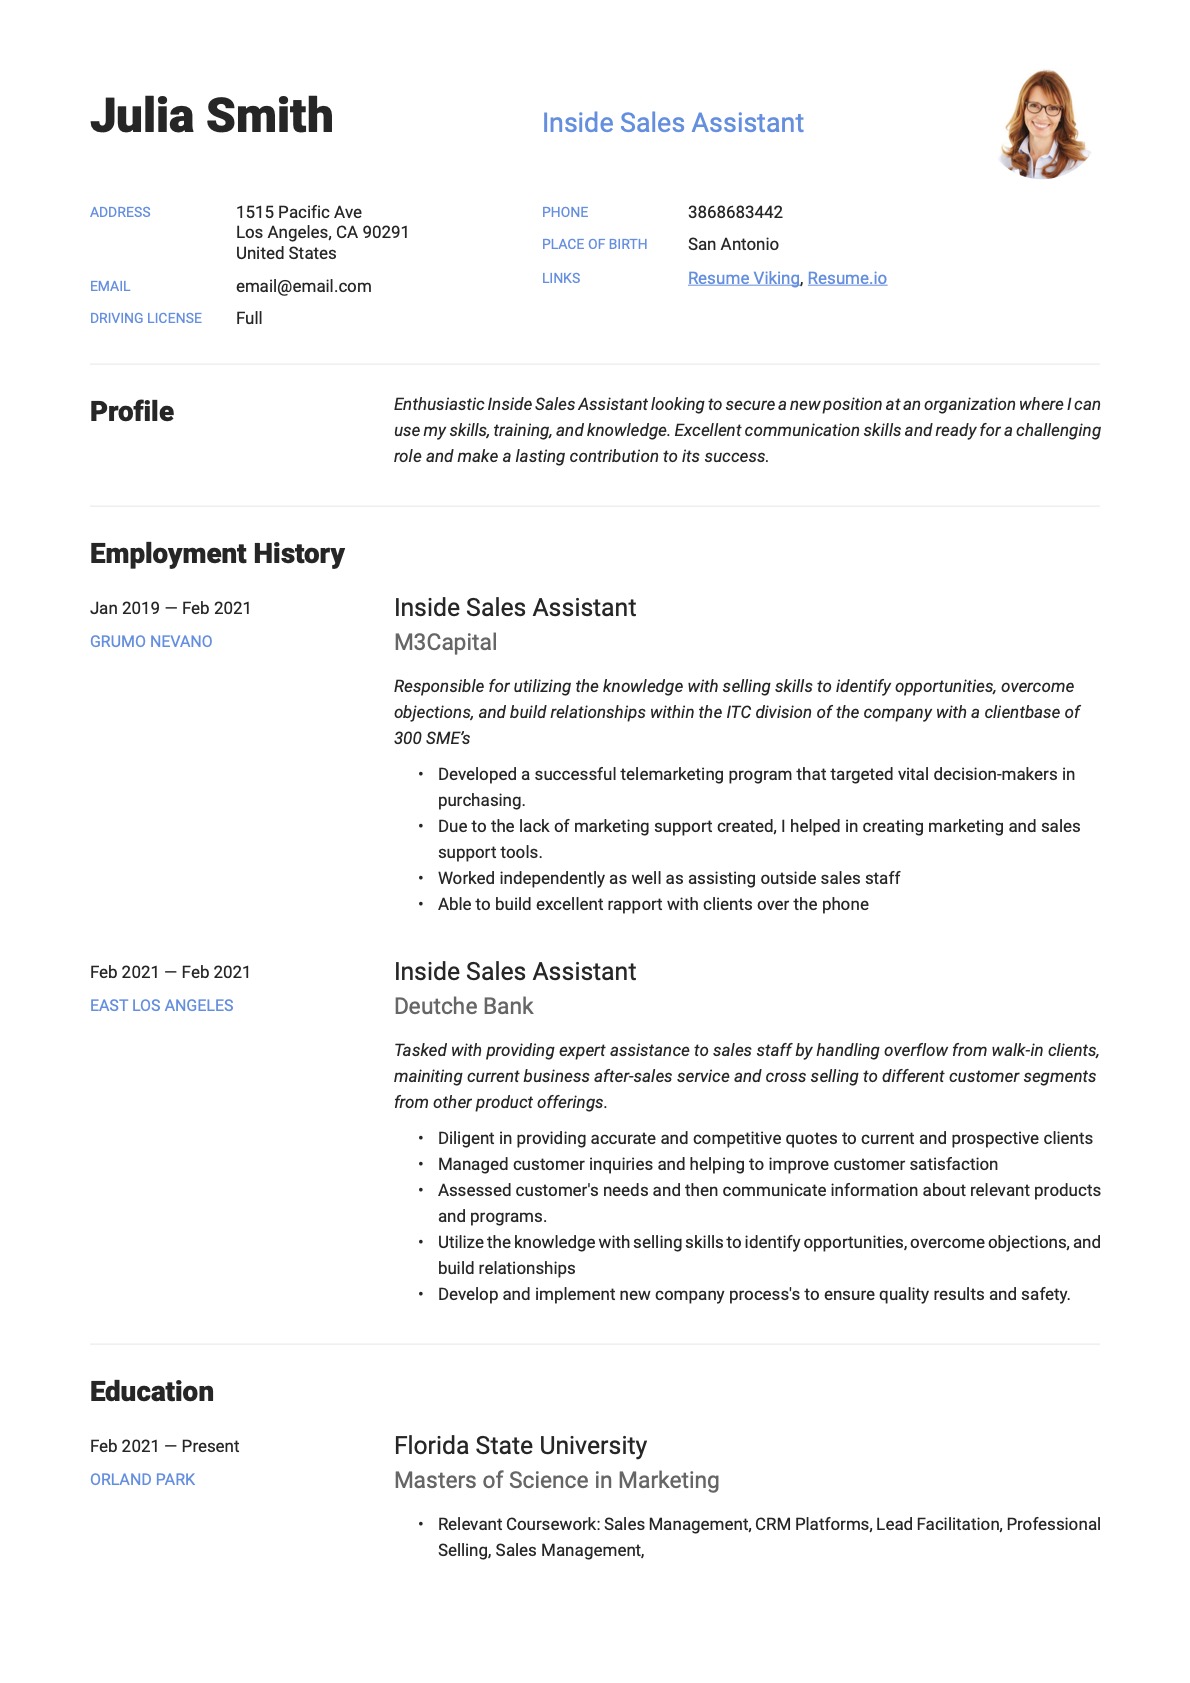 Example Resume Inside Sales Assistant-16